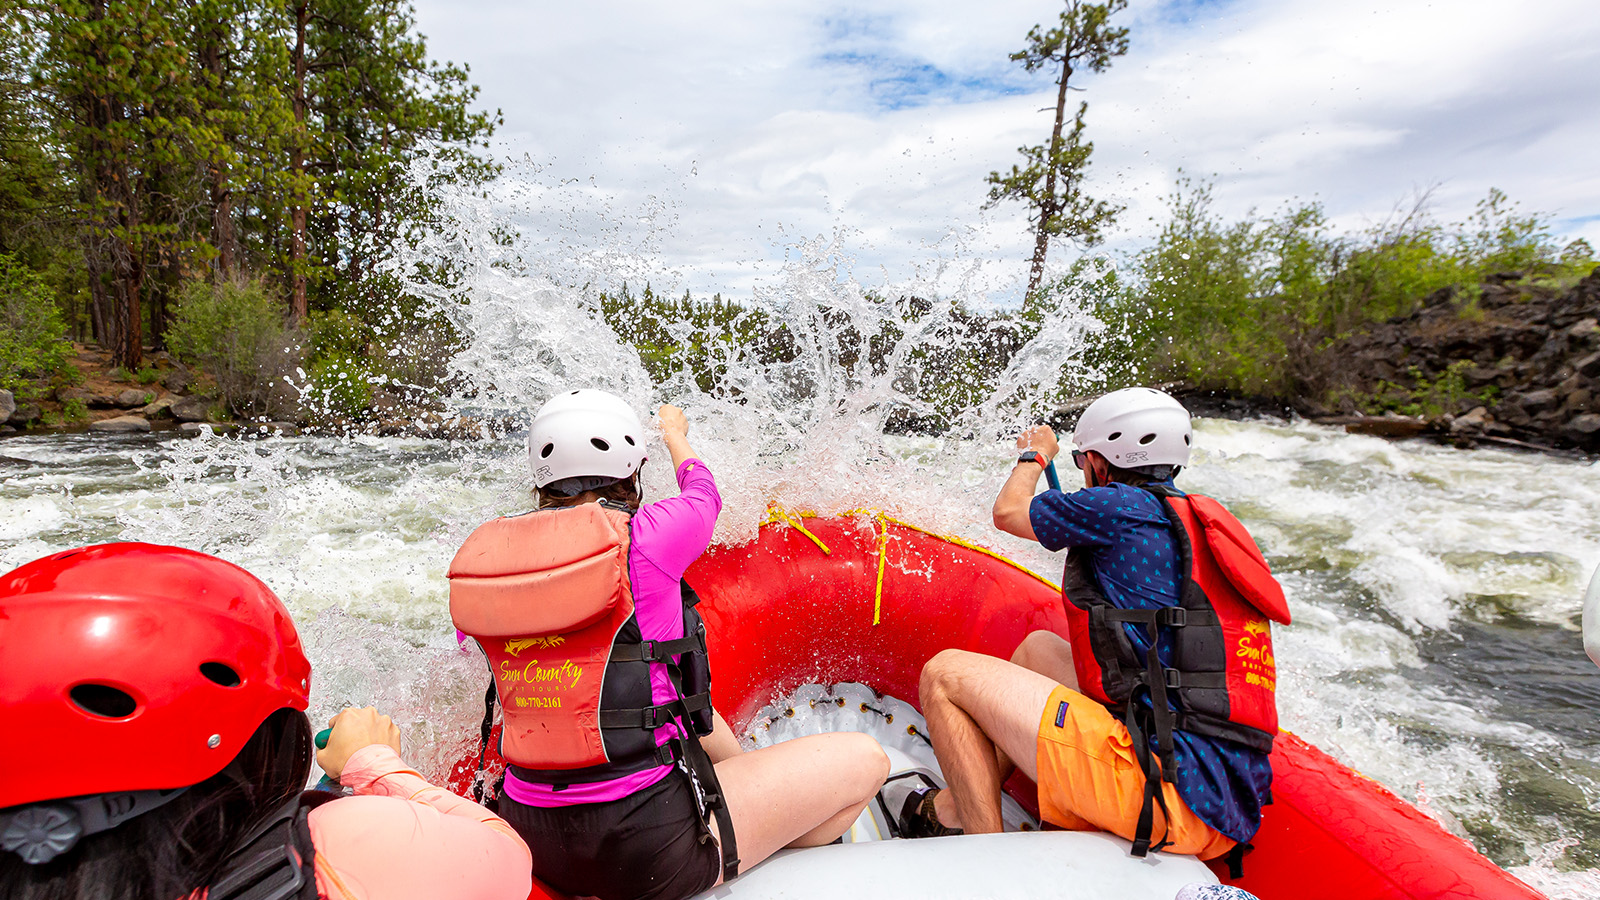 Whitewater rafting in Bend, OR